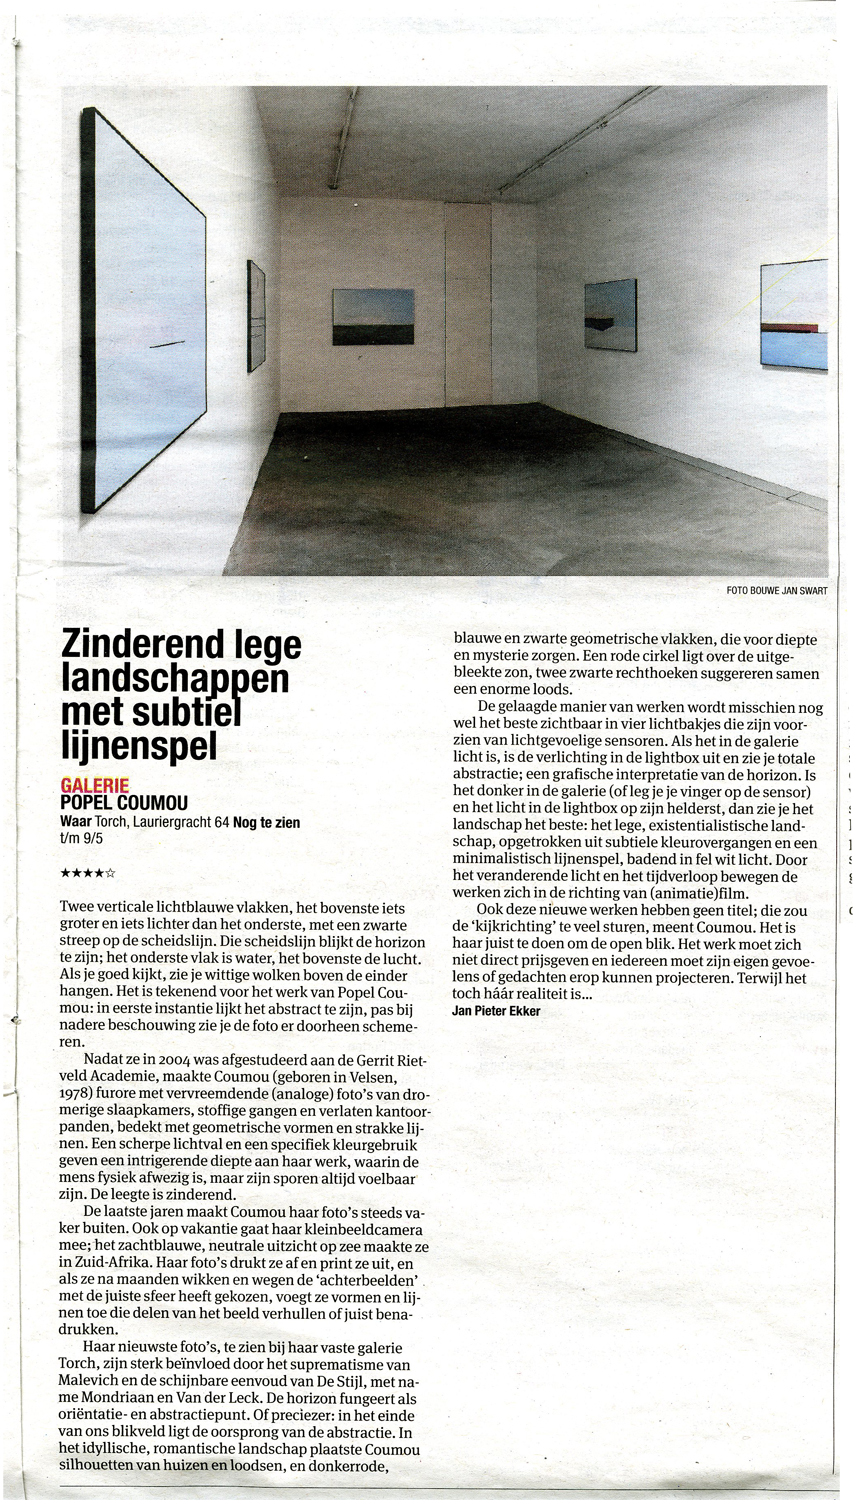 Het Parool May 1st 2015 By Jan Pieter Ekker 4 start rating about my show in TORCH Gallery